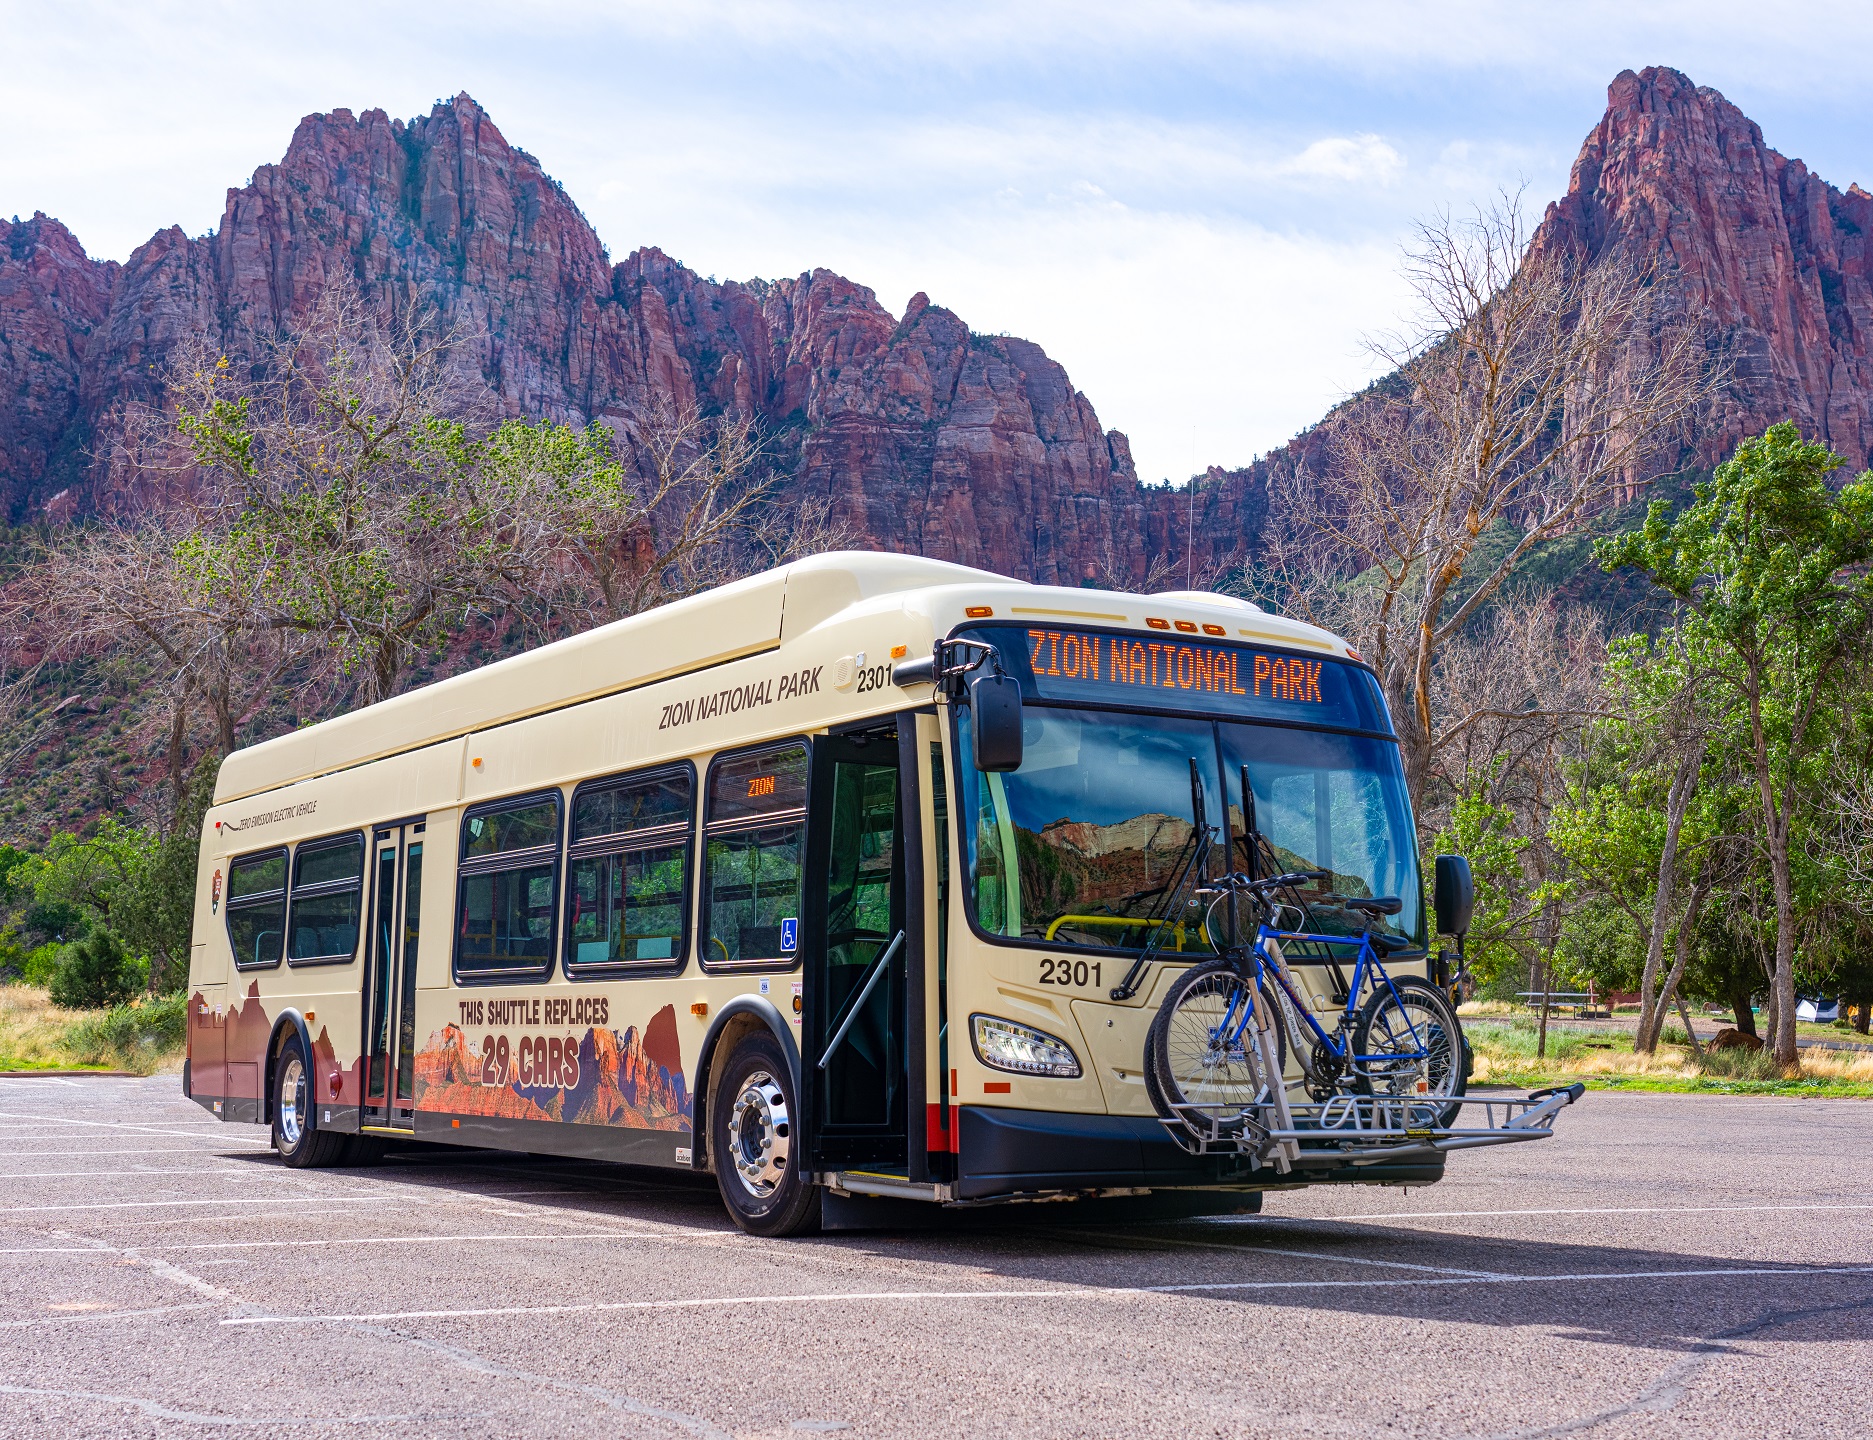 Electric shuttle bus with bikes on a rack mounted in front stands in Zion National Park with red rock towering behind. Text on bus reads, "This shuttle replaces 29 cars."